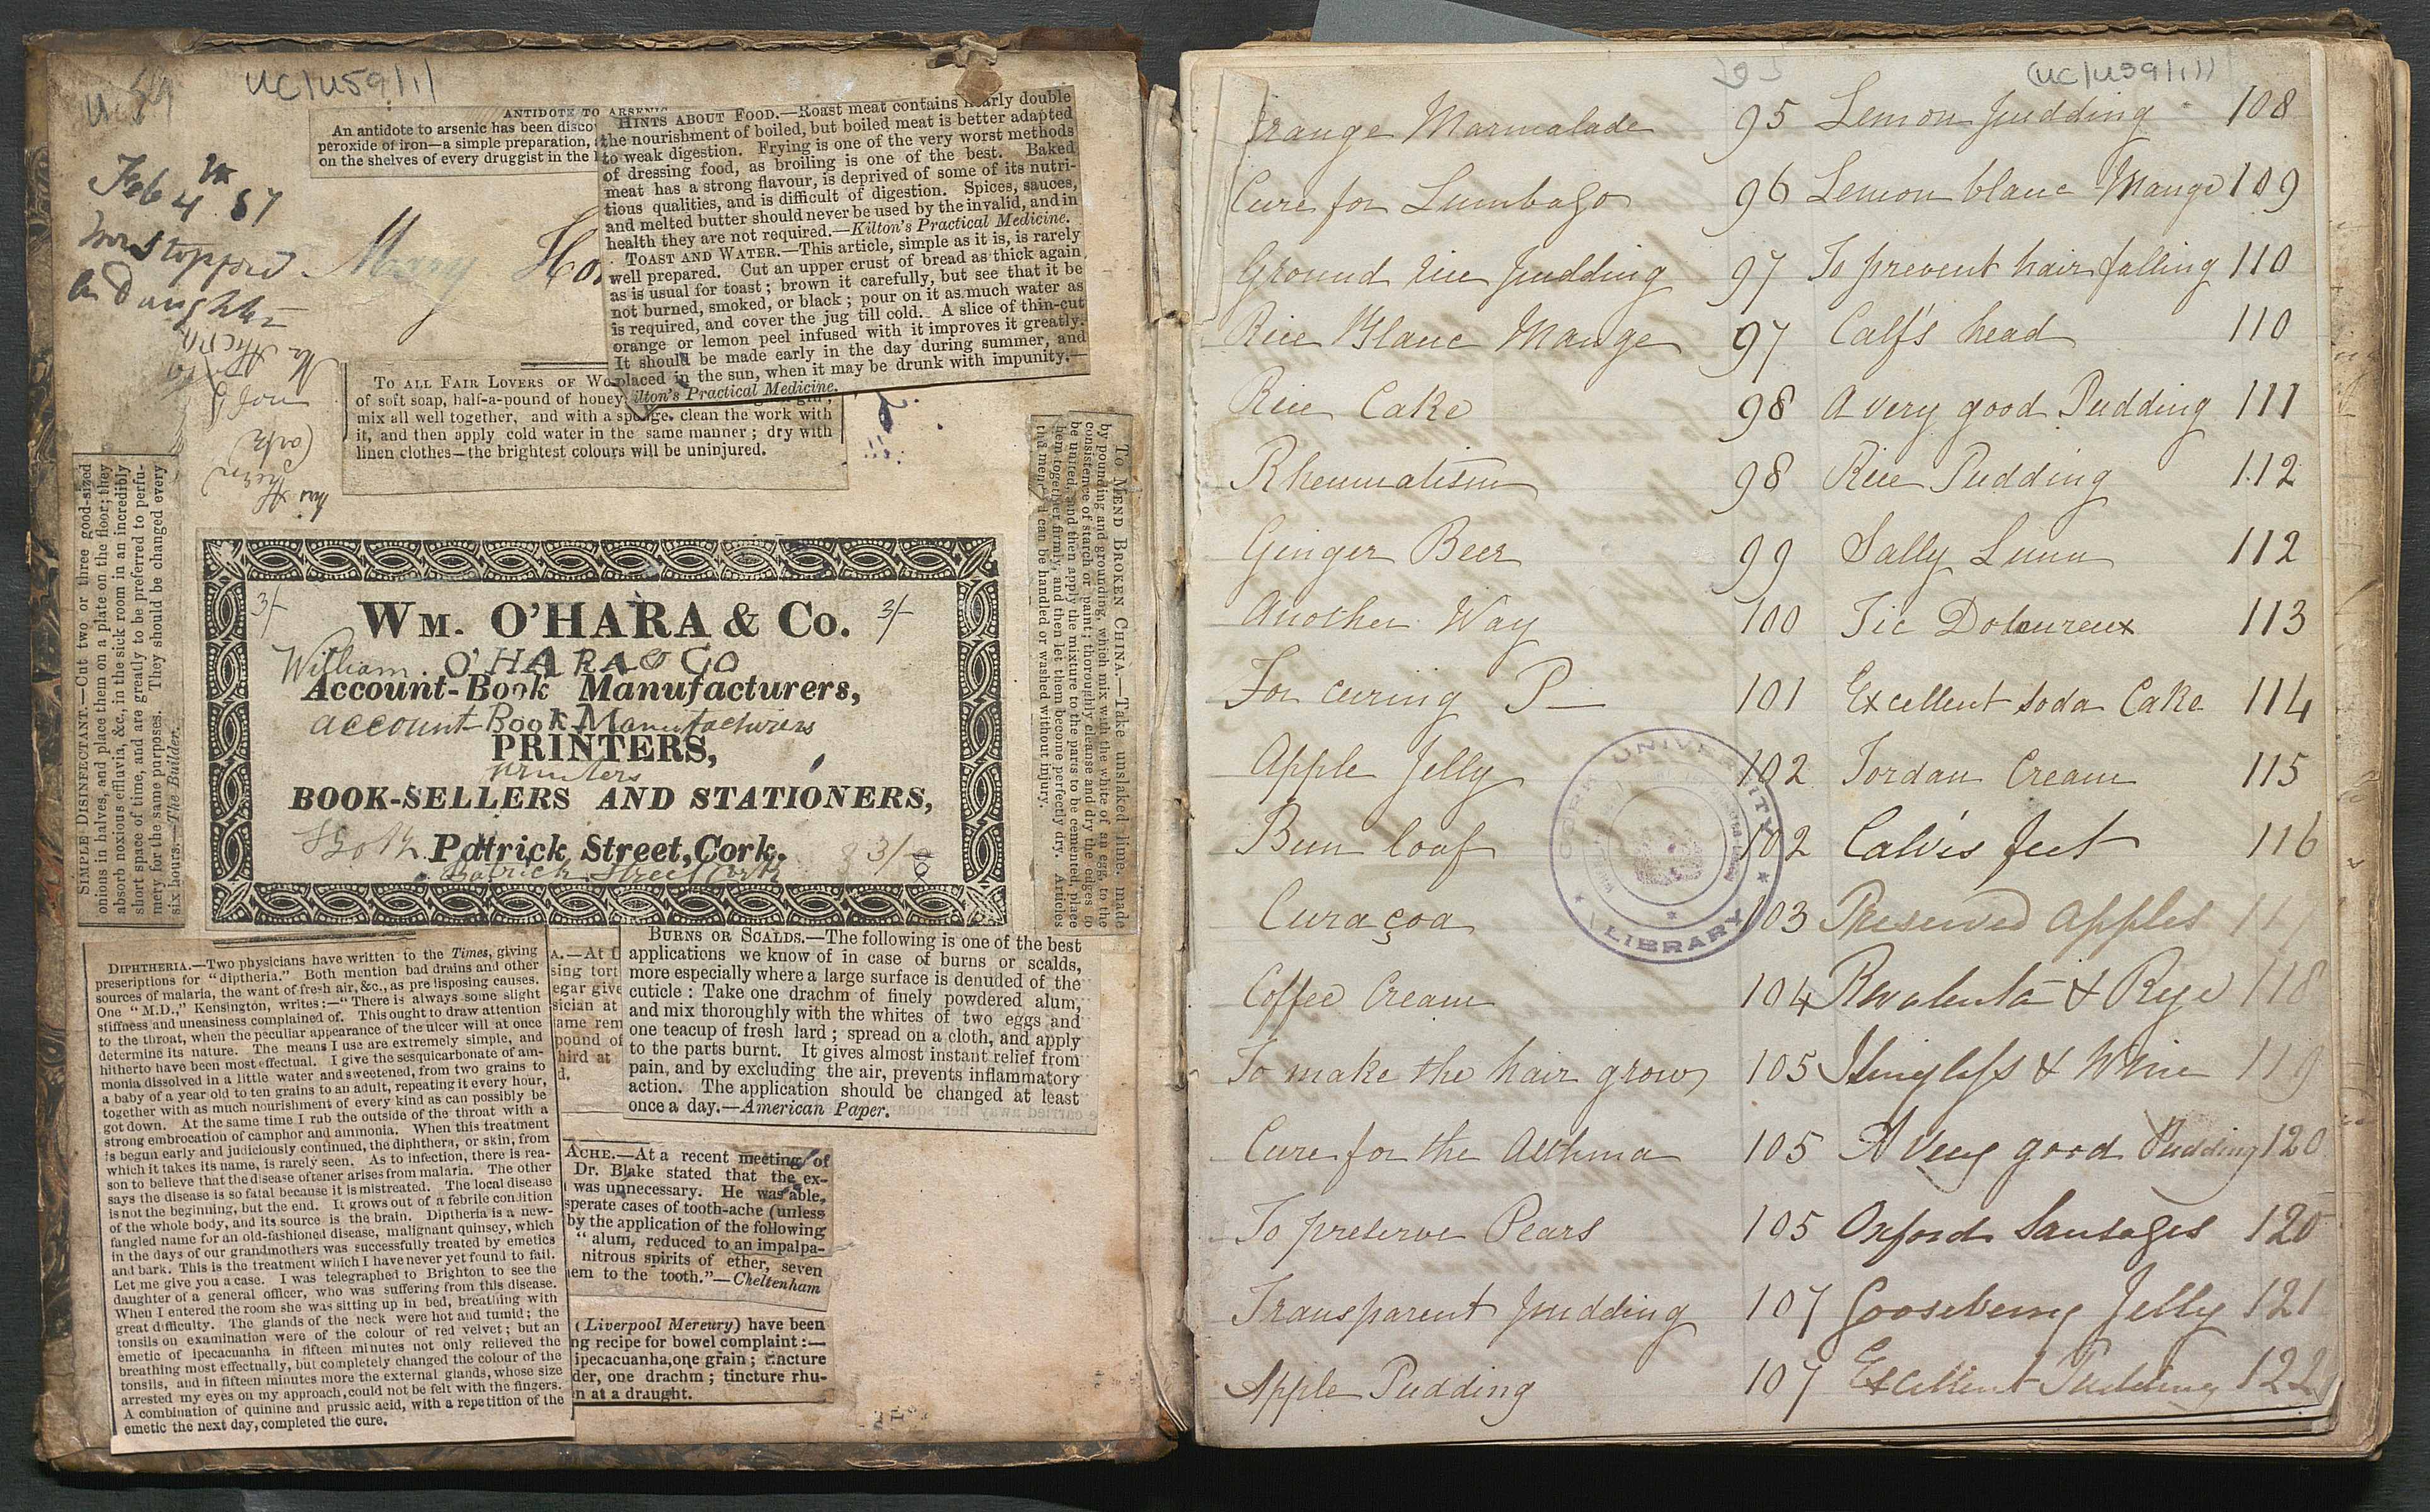 The front paper has pasted newspaper snippets of medicinal recipes e.g. 'Burns on Scalds.' The facing page has a table of contents for culinary recipes. The table of contents starts with a recipe on p95. This is a typical example of a historical recipe book. 